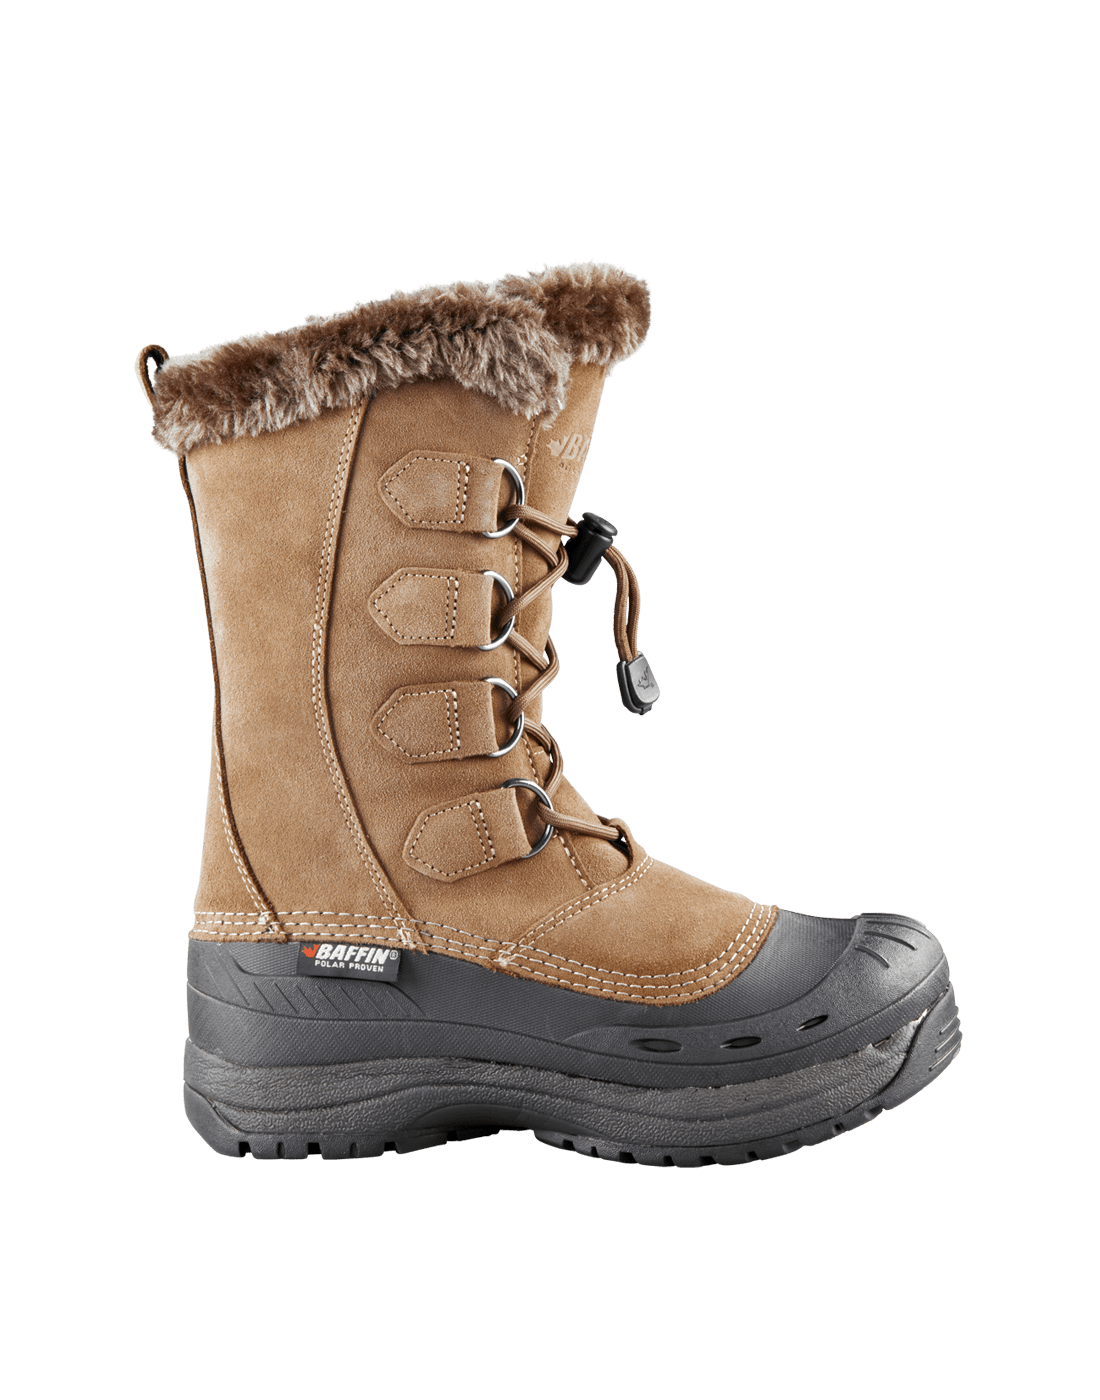 Western Powersports Boots Women's Chloe Boots by Baffin